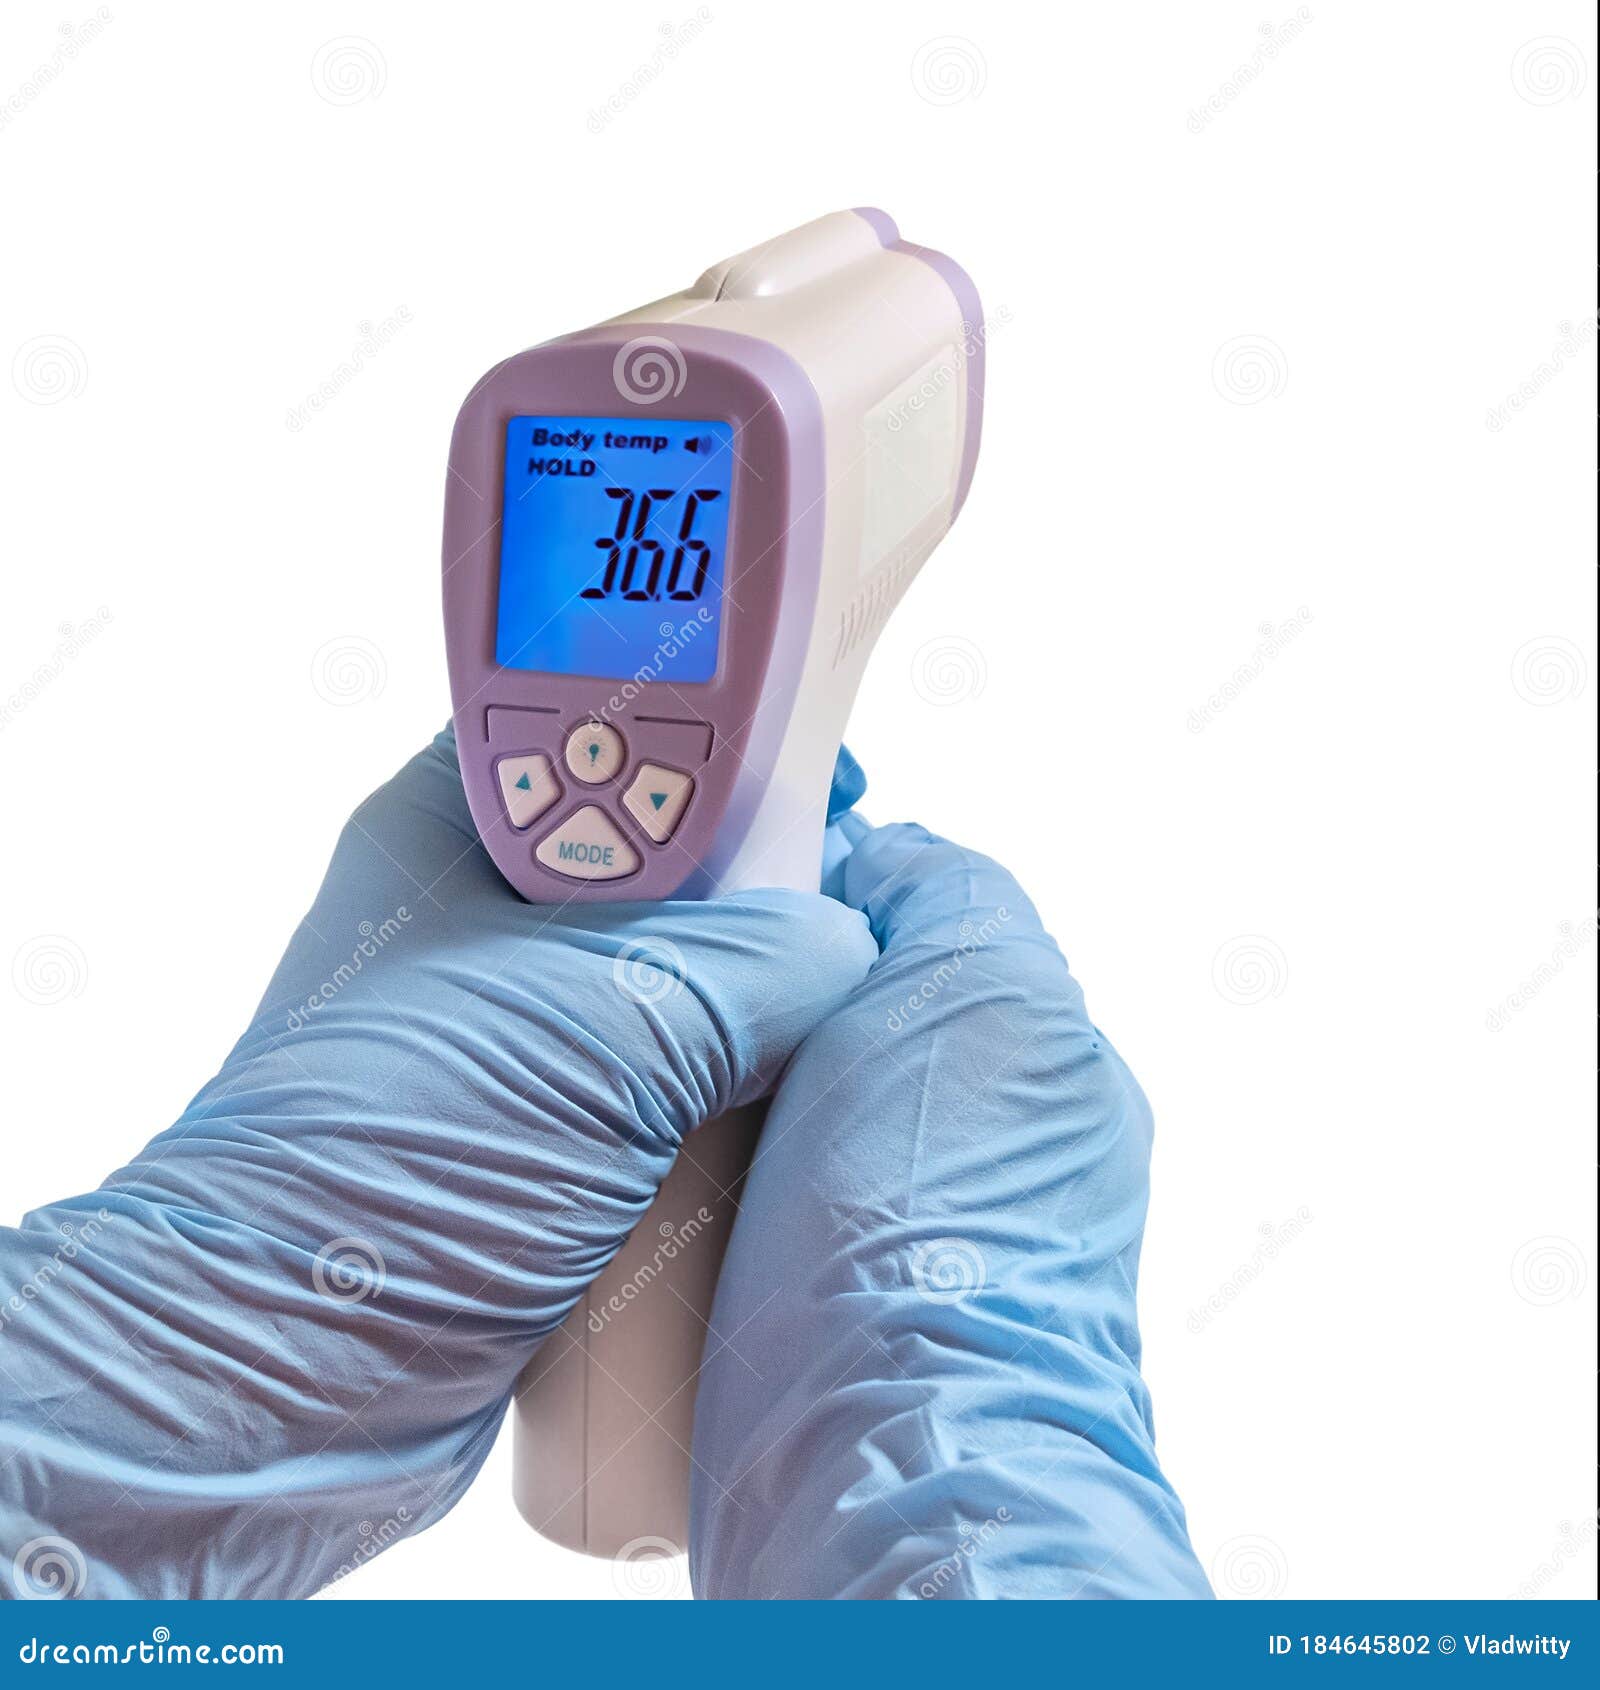 https://thumbs.dreamstime.com/z/thermometer-lcd-gun-isometric-medical-digital-non-contact-infrared-sight-handheld-forehead-readings-covid-temperature-reading-body-184645802.jpg